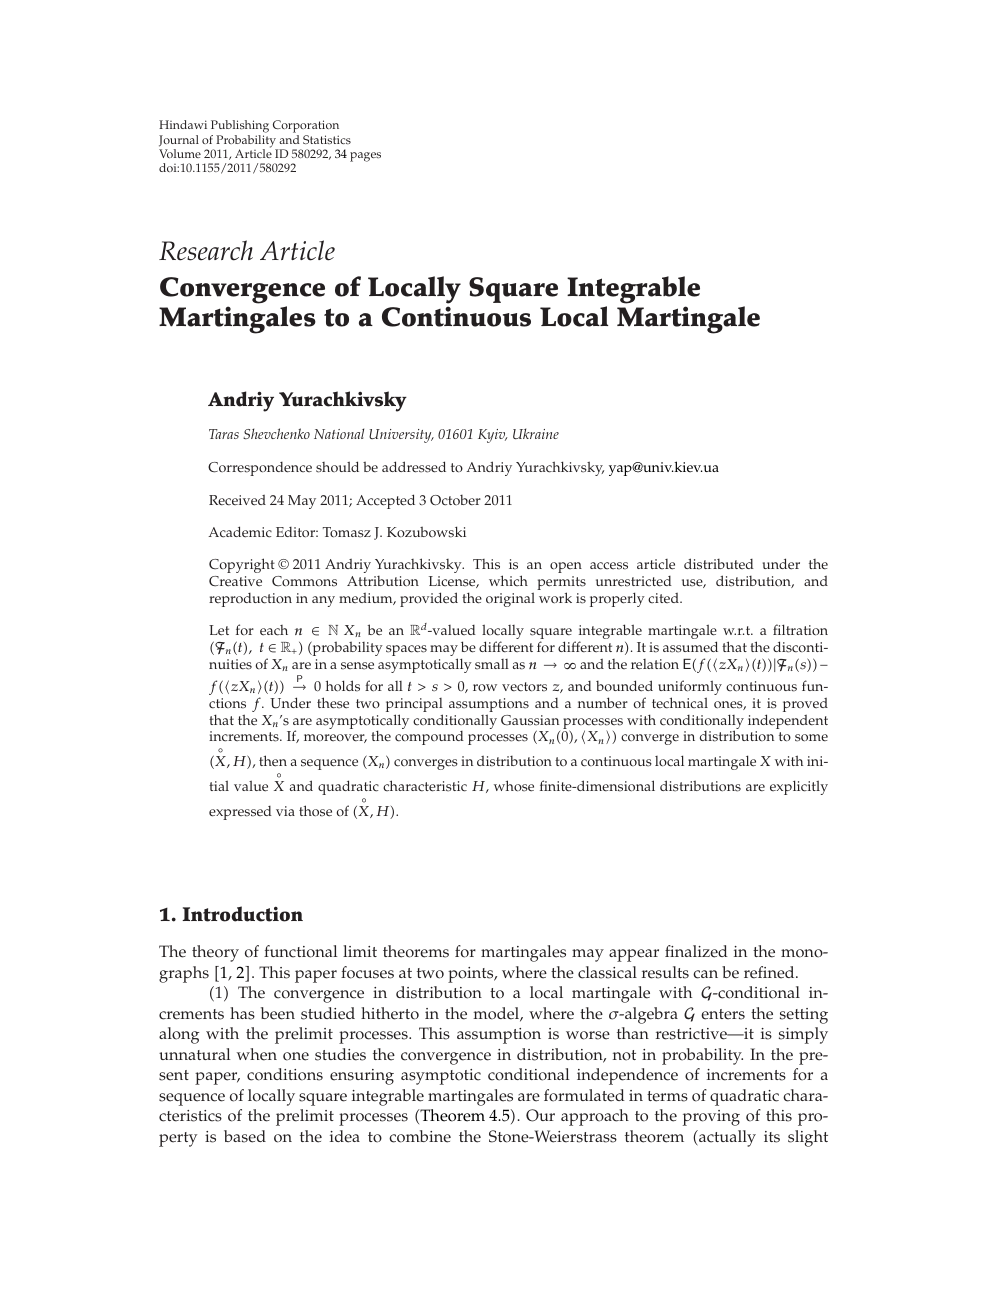 Convergence Of Locally Square Integrable Martingales To A Continuous Local Martingale Topic Of Research Paper In Mathematics Download Scholarly Article Pdf And Read For Free On Cyberleninka Open Science Hub